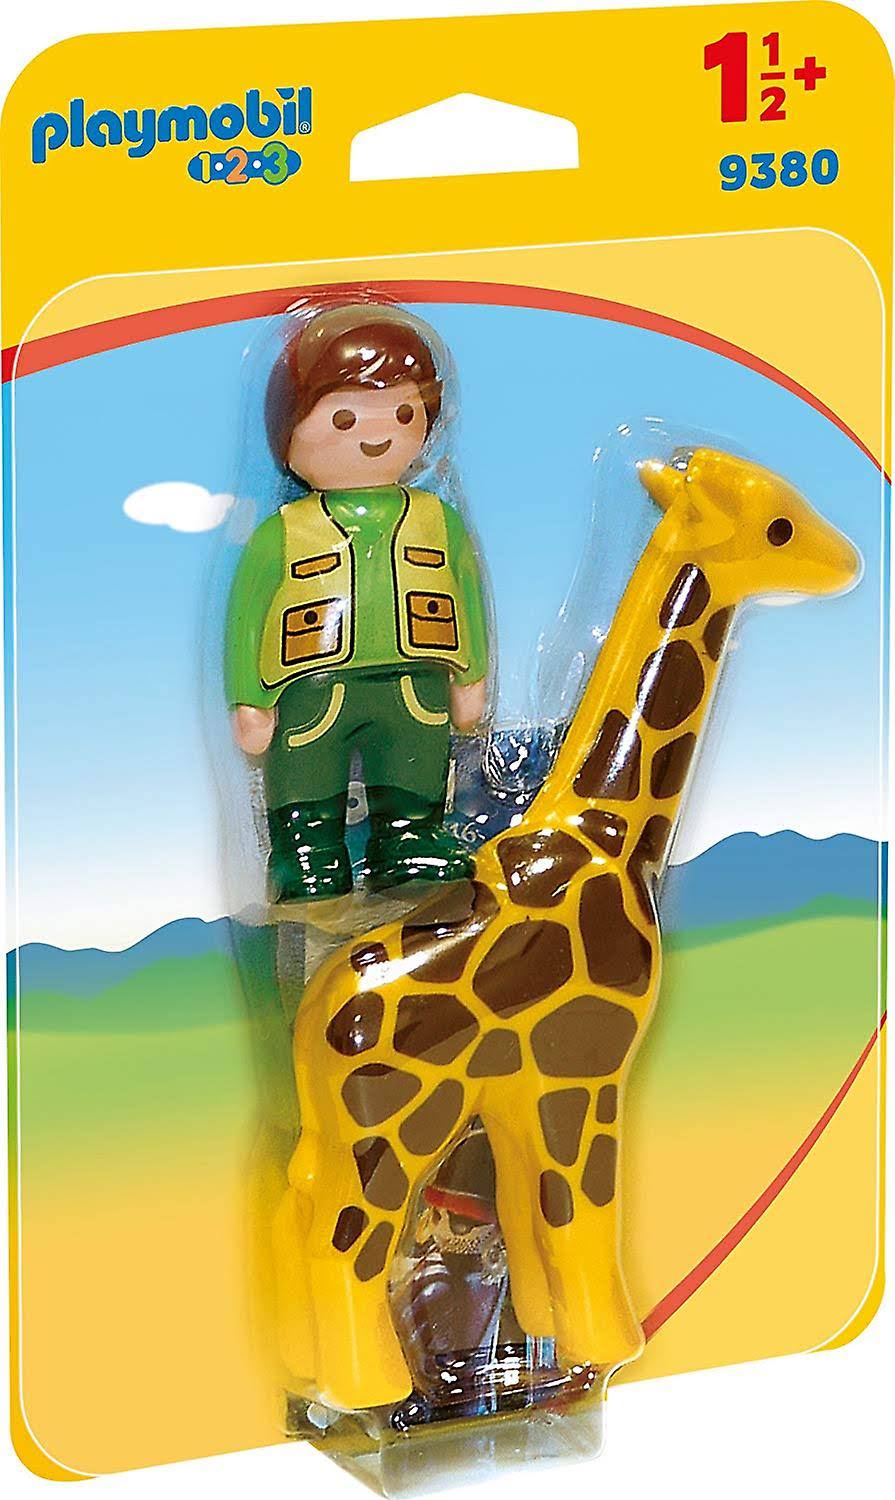 Playmobil 123 Zookeeper with Giraffe Building Set